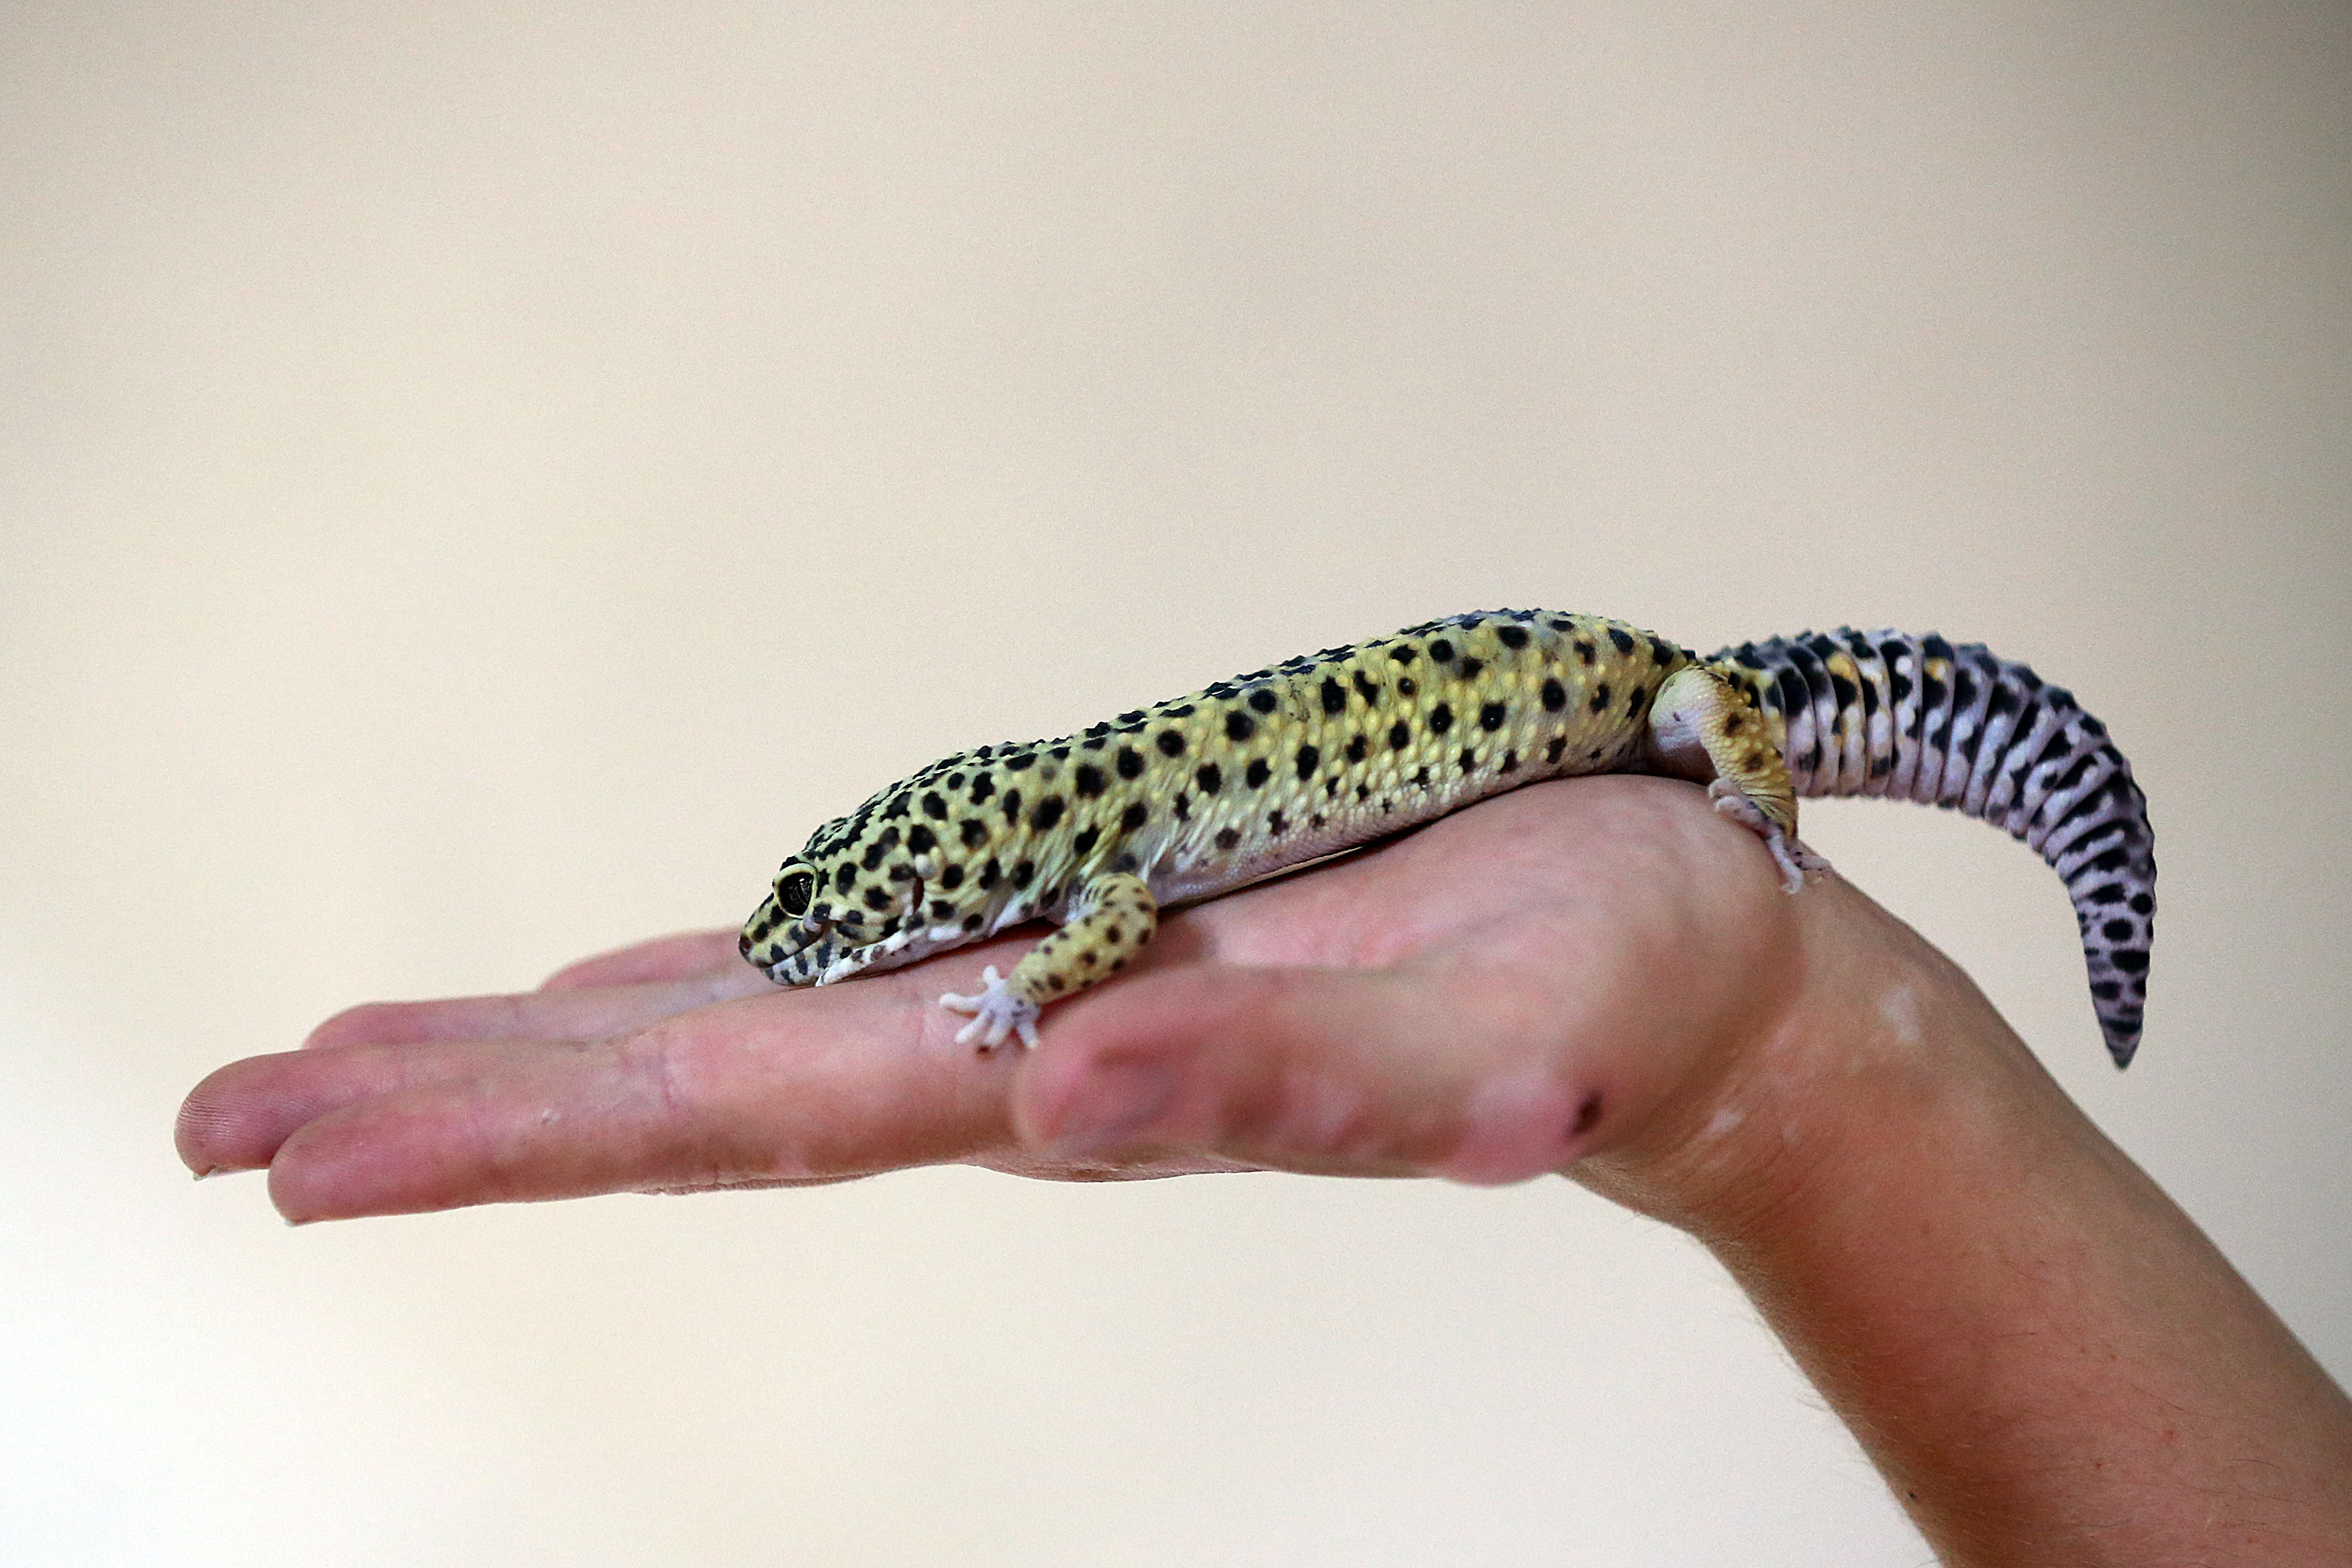 3000x2000 But let's get this out of the way: the leopard gecko is still weird as hell.